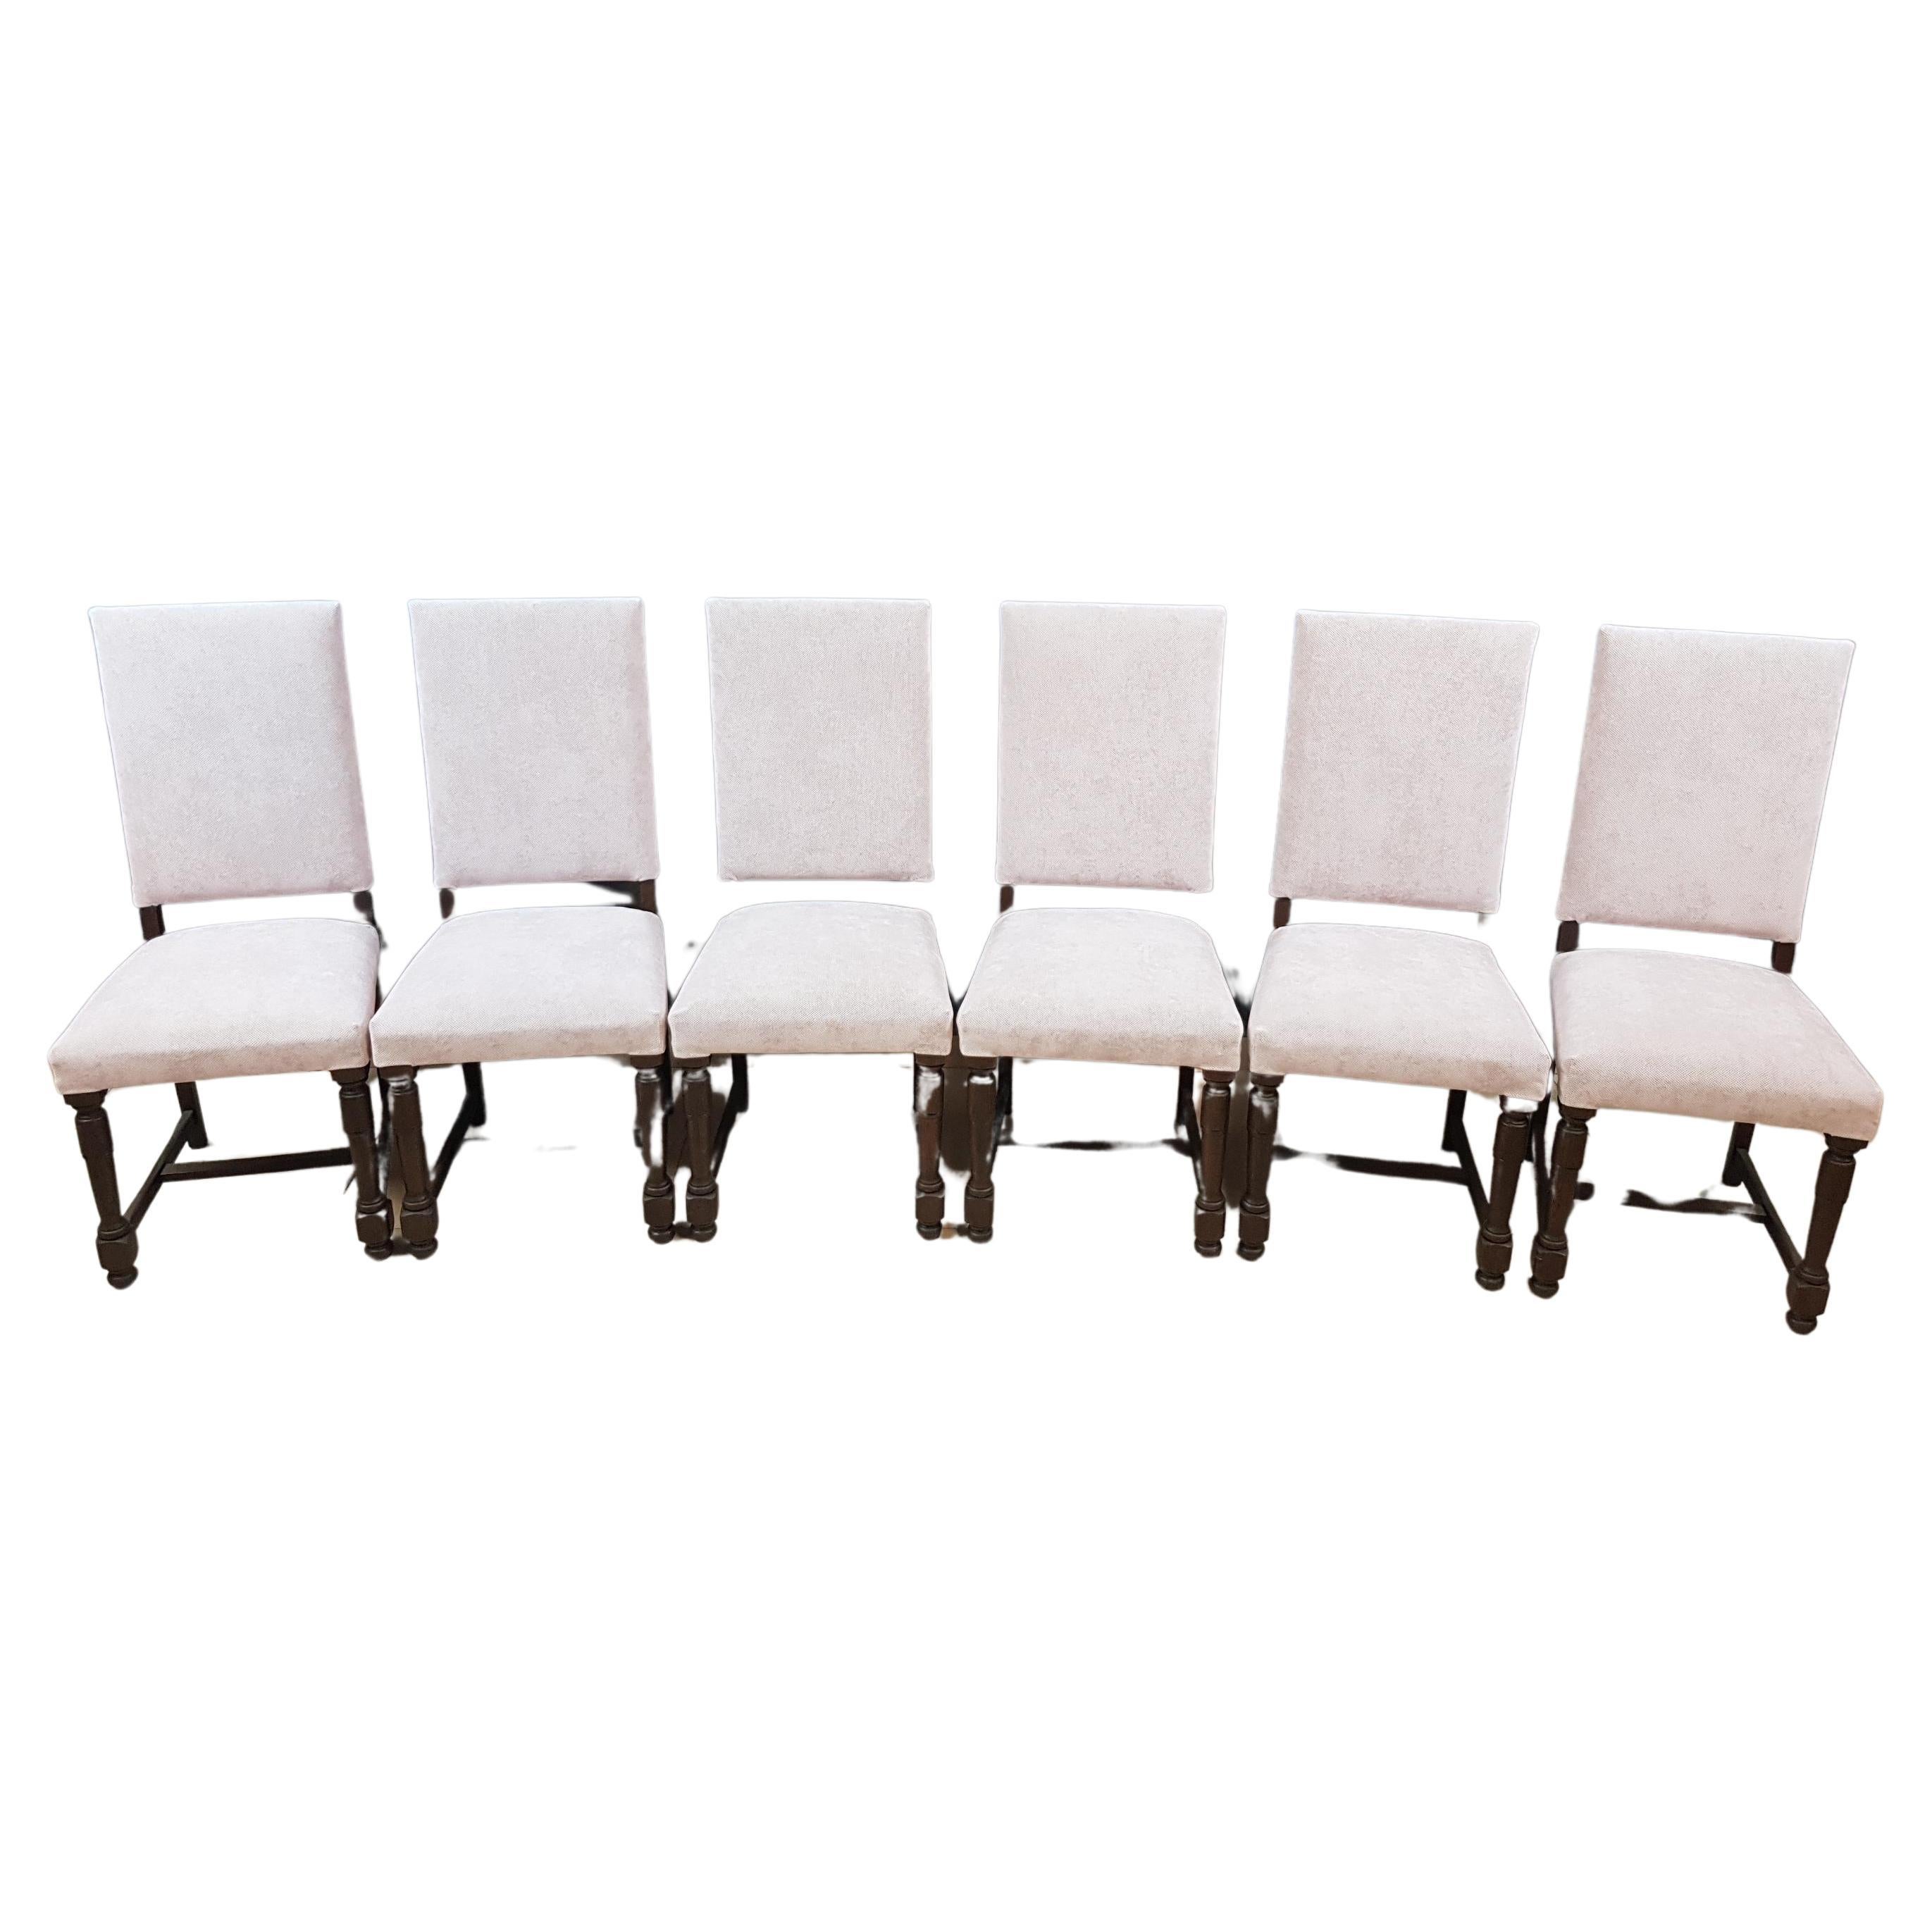 French Vintage Square Back Dining Chairs - Set of 6